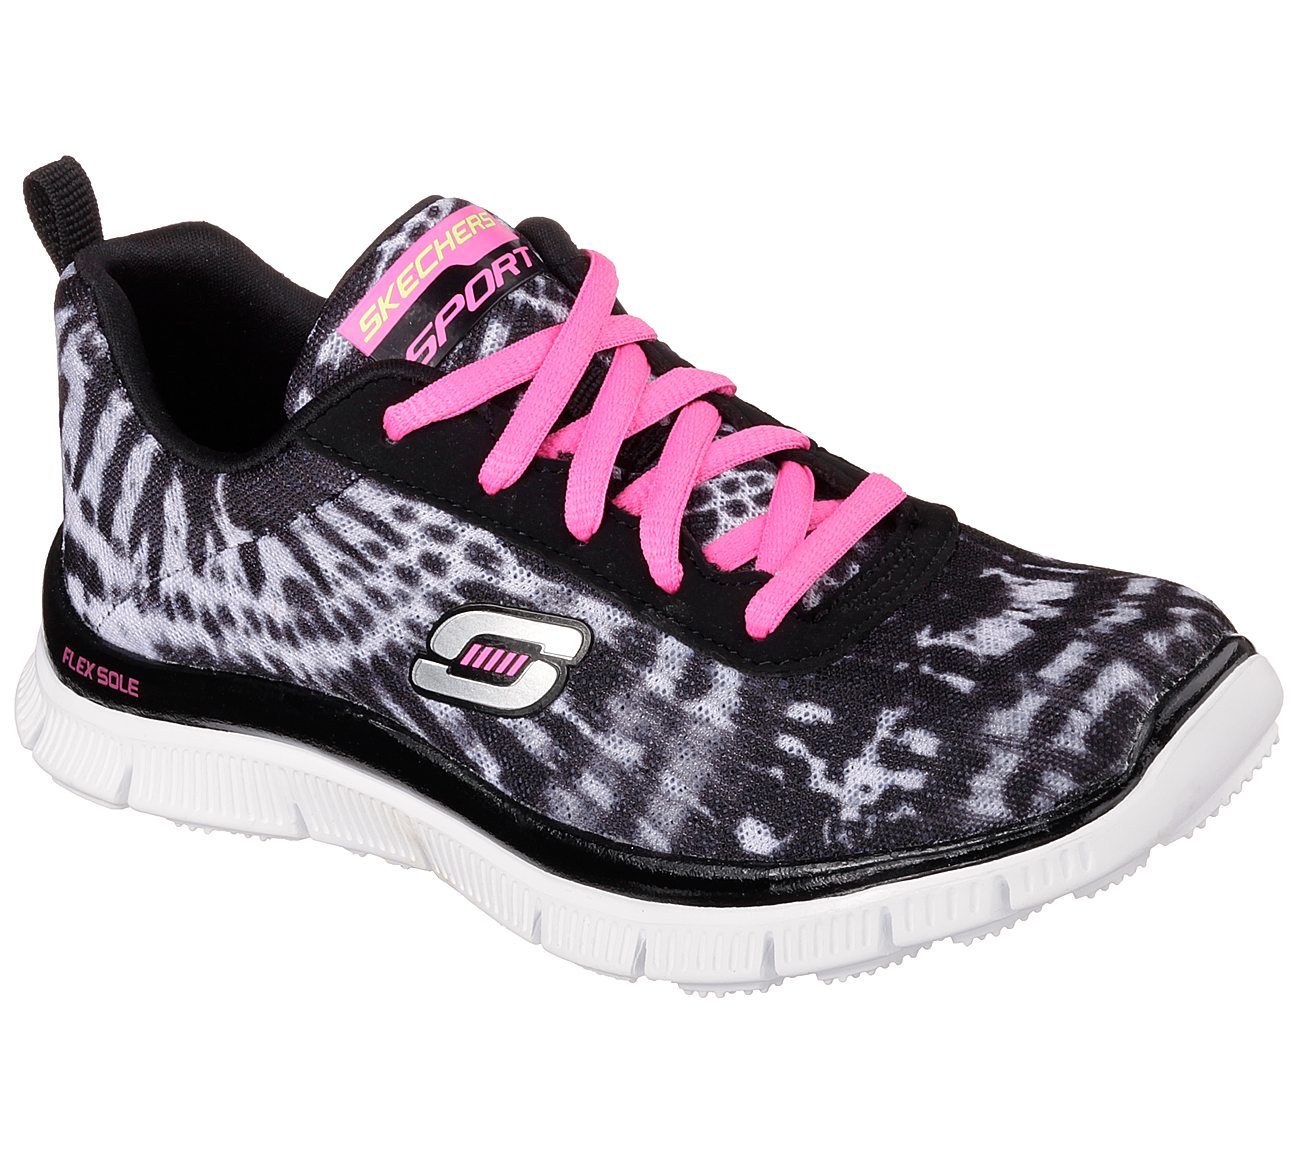 Limited Edition SKECHERS Sport Shoes